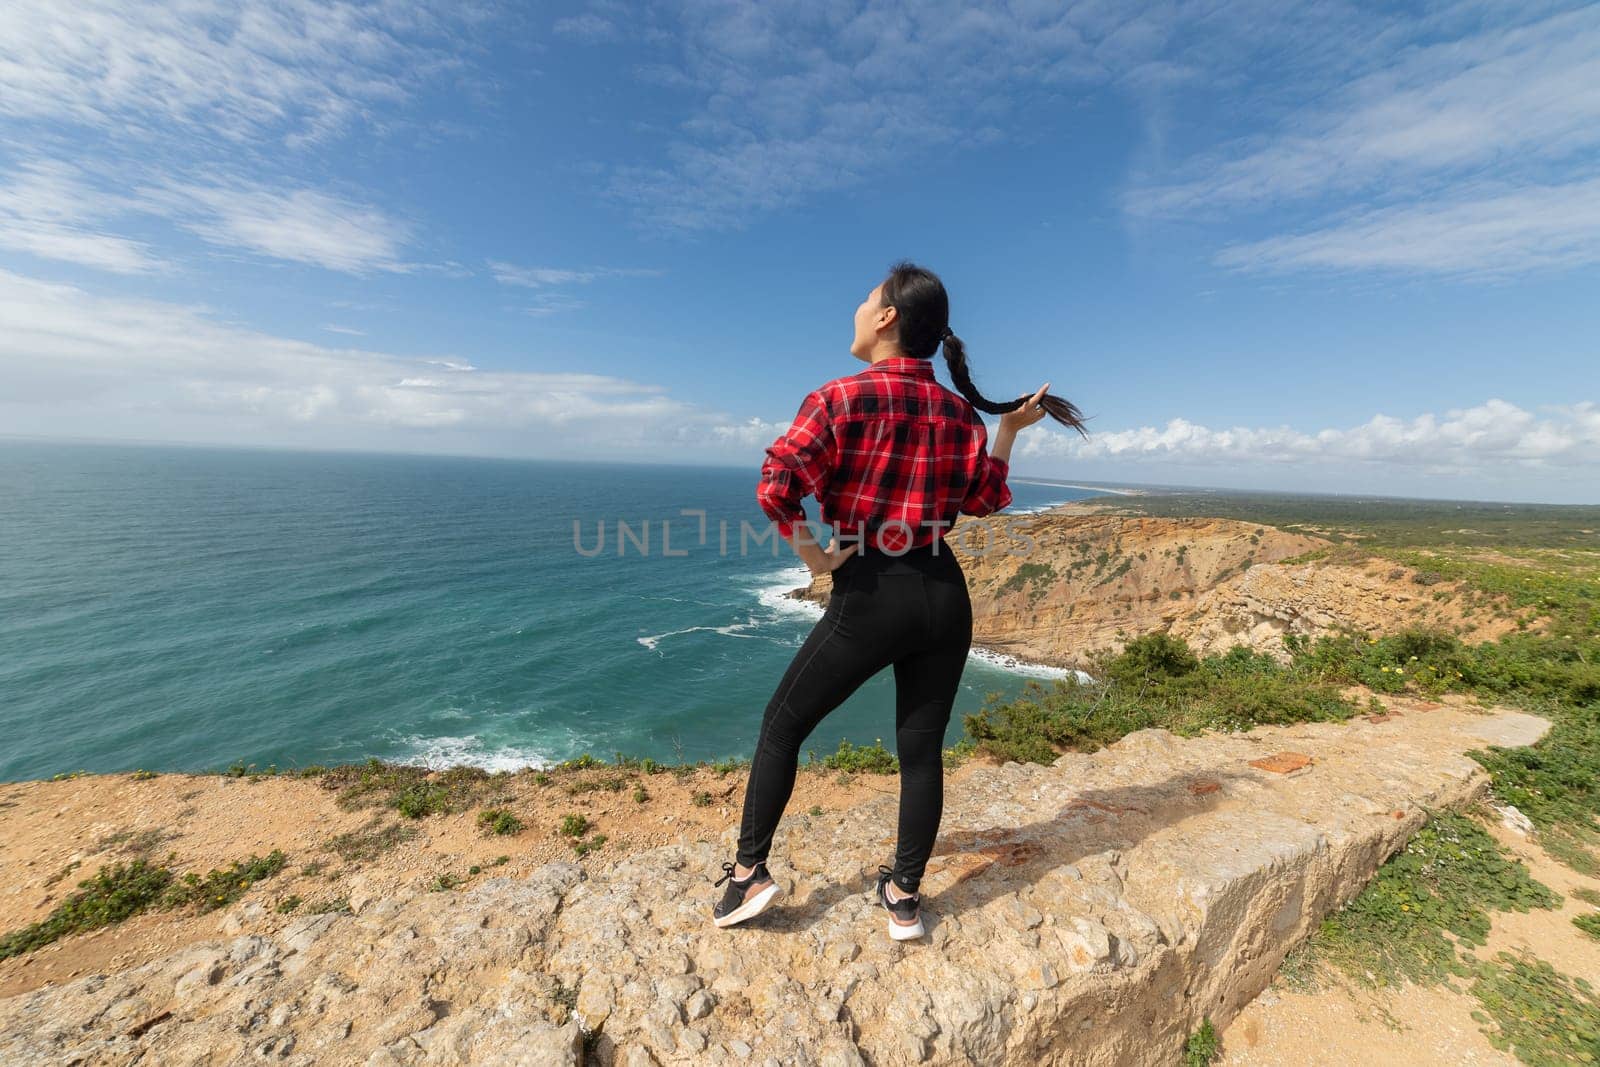 A woman stands on a rocky cliff overlooking the ocean. She is wearing a red and black plaid shirt and black pants. The sky is clear and blue, and the ocean is calm. The woman is enjoying the view